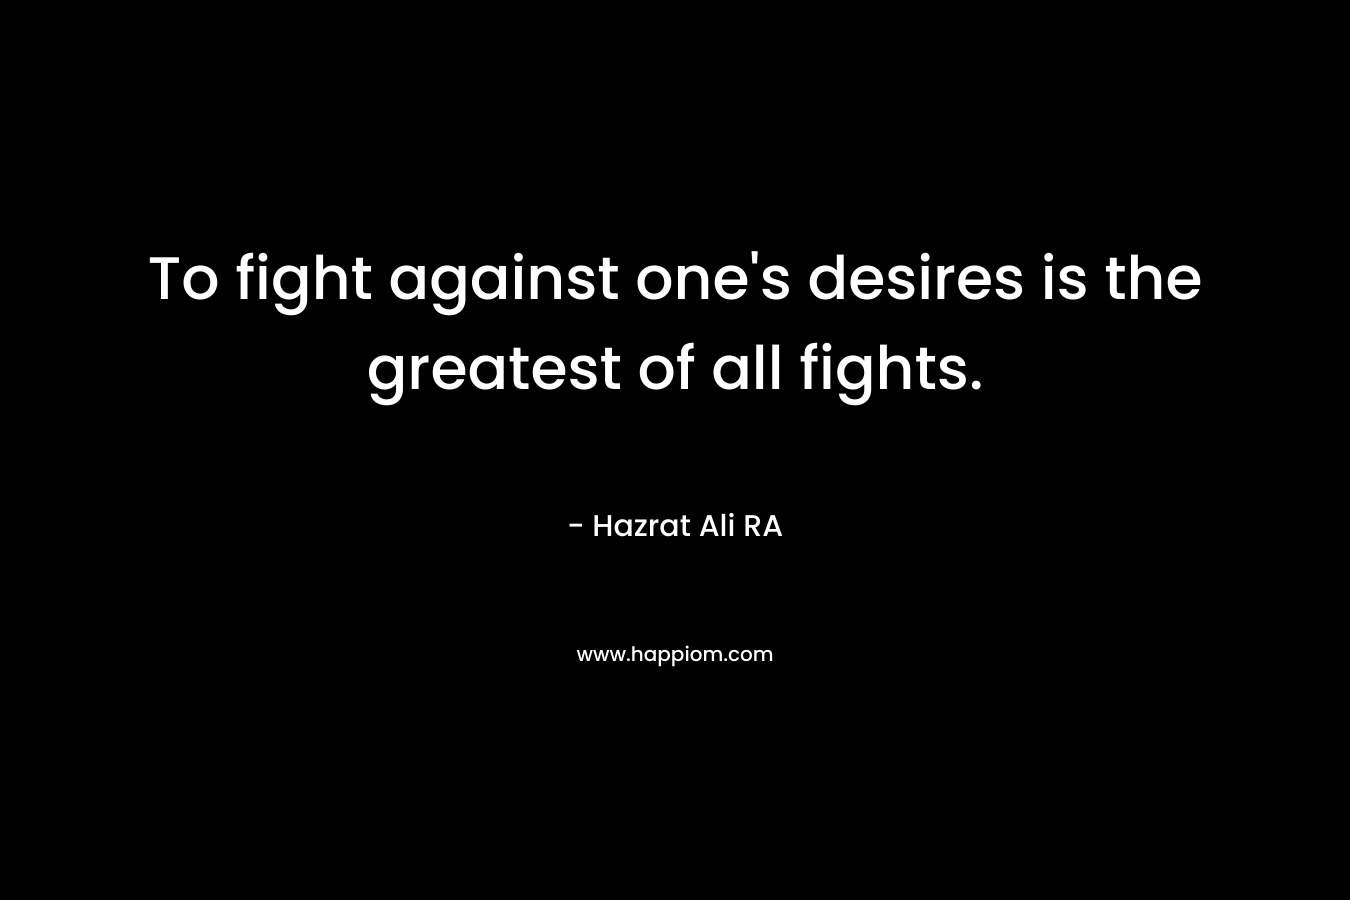 To fight against one's desires is the greatest of all fights.